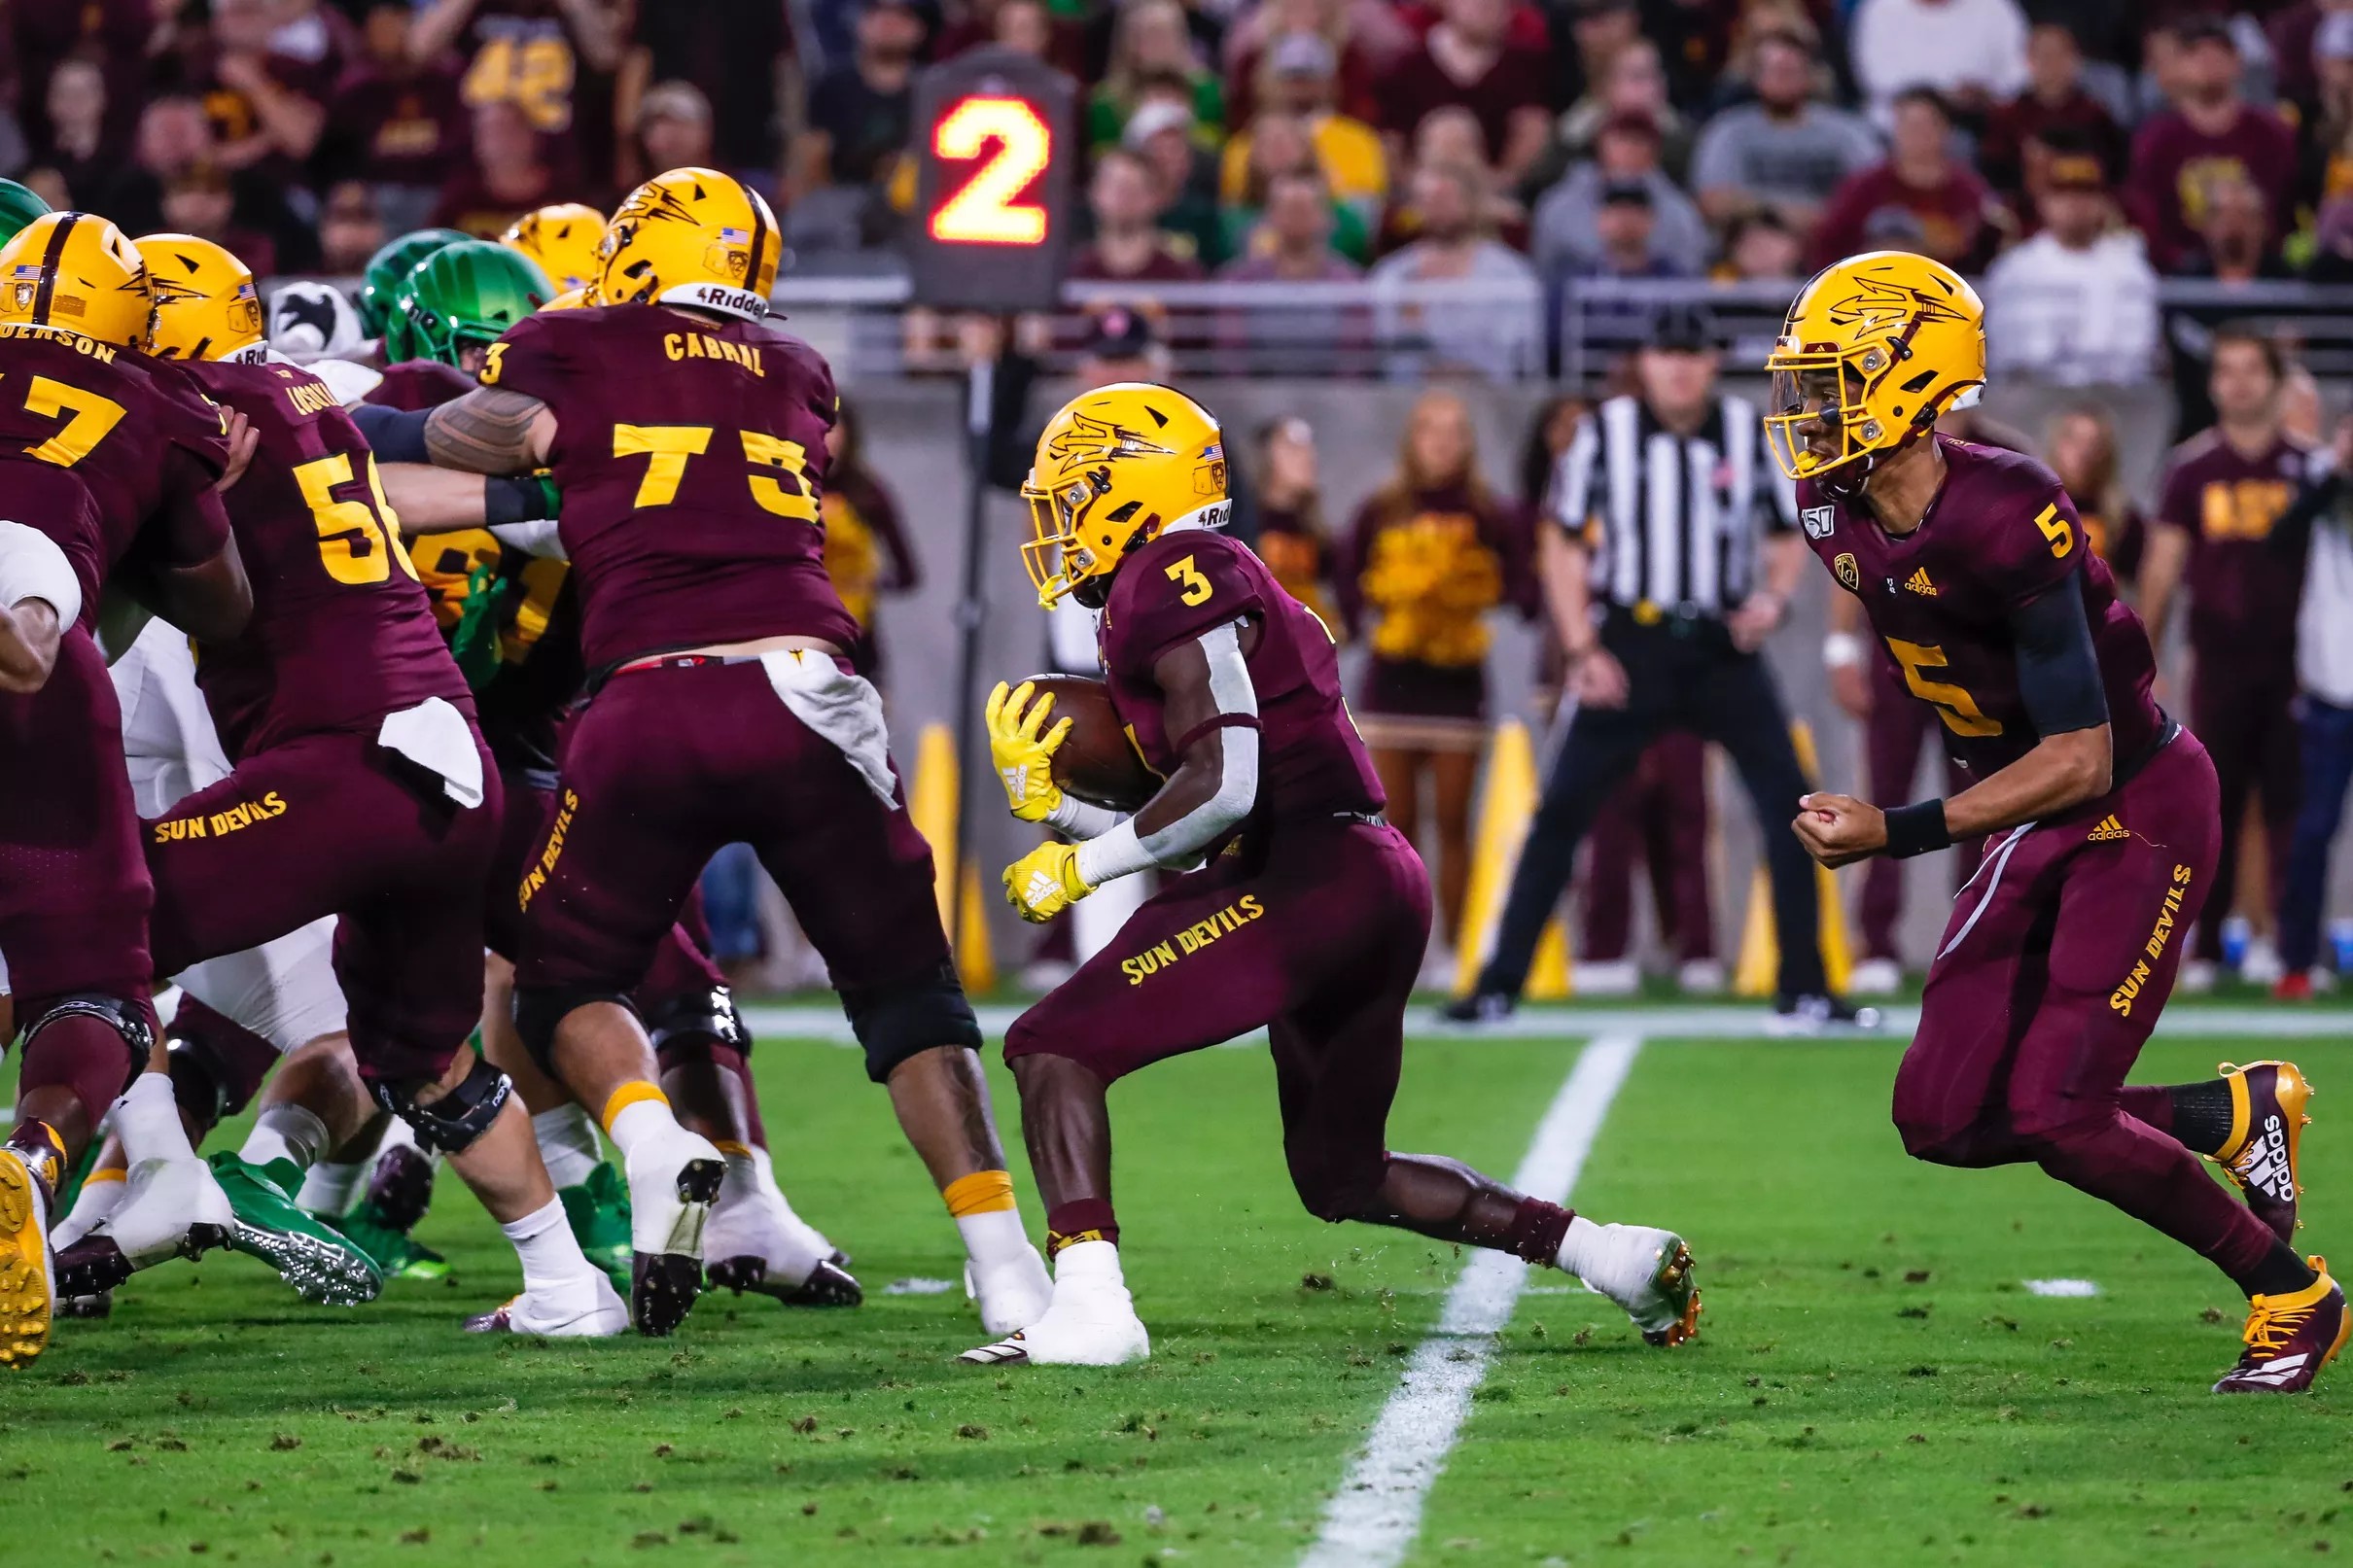 ASU expert previews the Territorial Cup and makes a score prediction